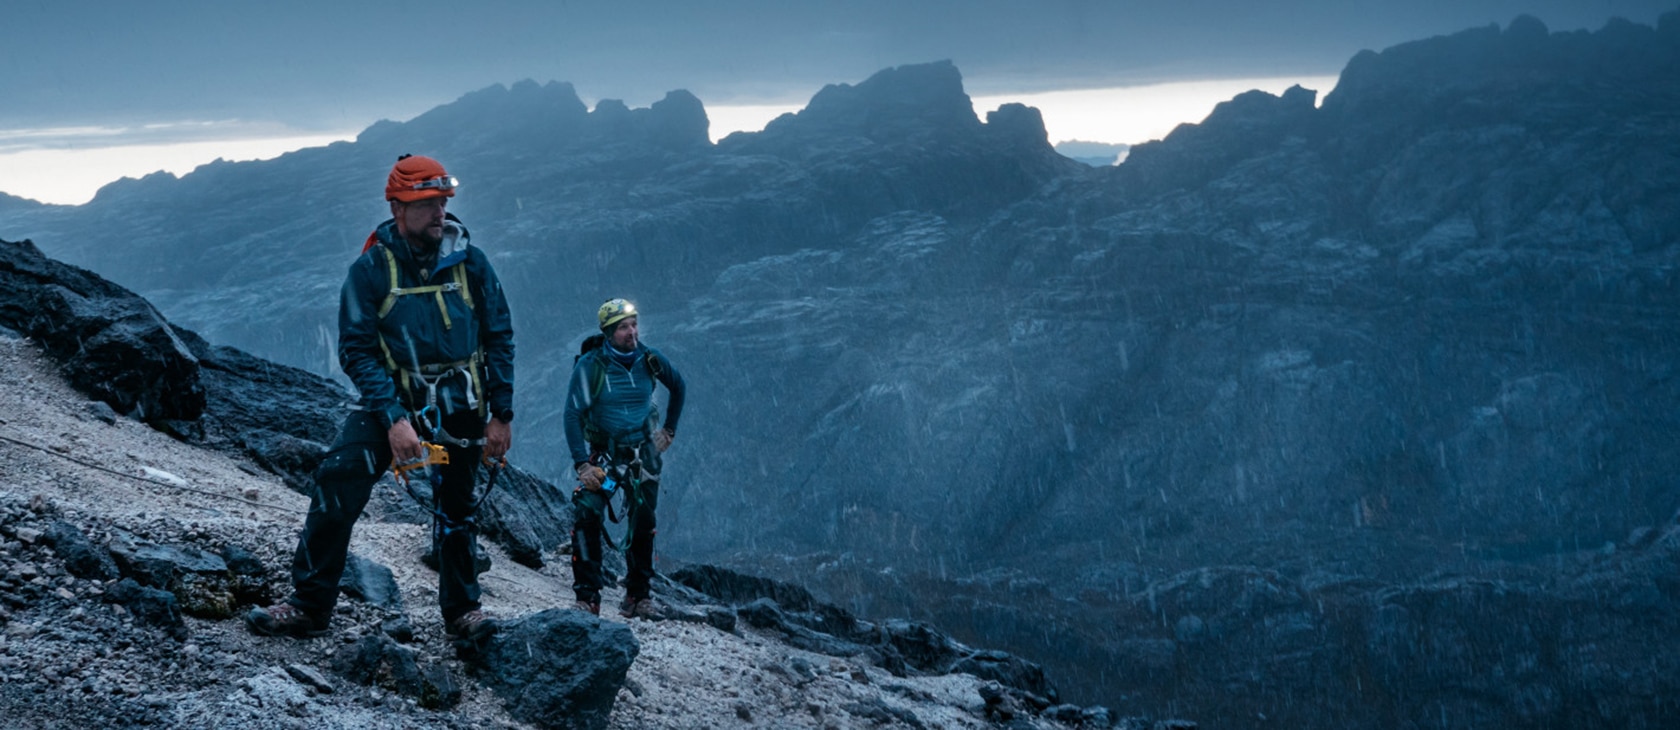 Two men with headlamps and climbing gear stand on a dark mountain as it rains